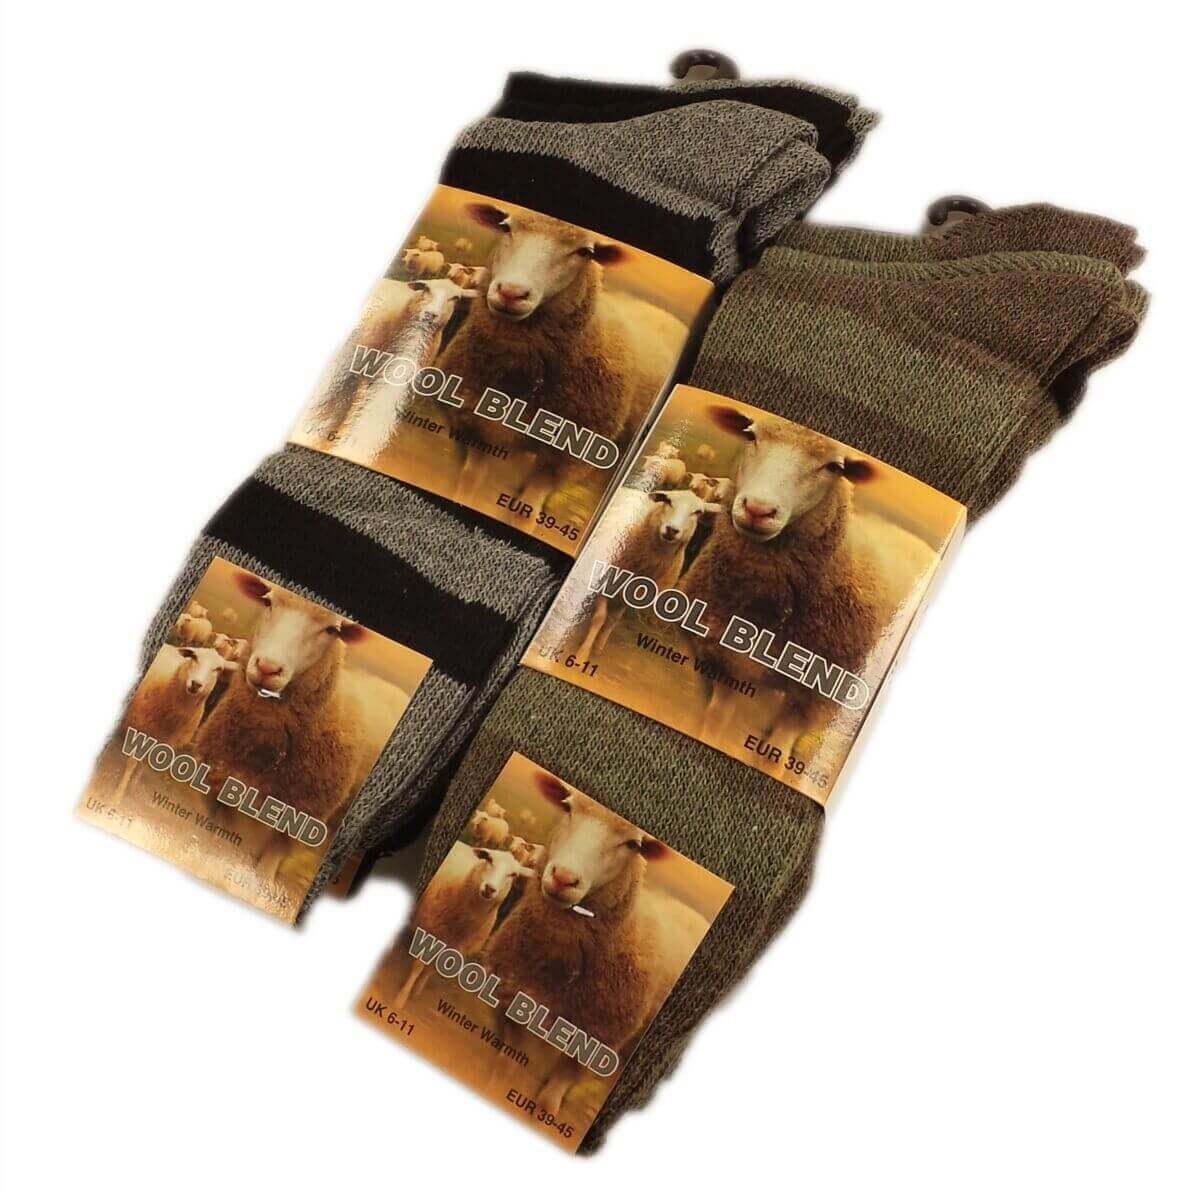 6 Pairs Of Men's Stripe Wool Blend Socks, Winter Warm Work Boot Socks. Buy now for £6.00. A Socks by Sock Stack. 6-11, anti bacterial, anti blister, assorted, athletics, boot, comfortable, cosy, home, Lambs wool, mens, mens socks, Out of stock, socks, sof